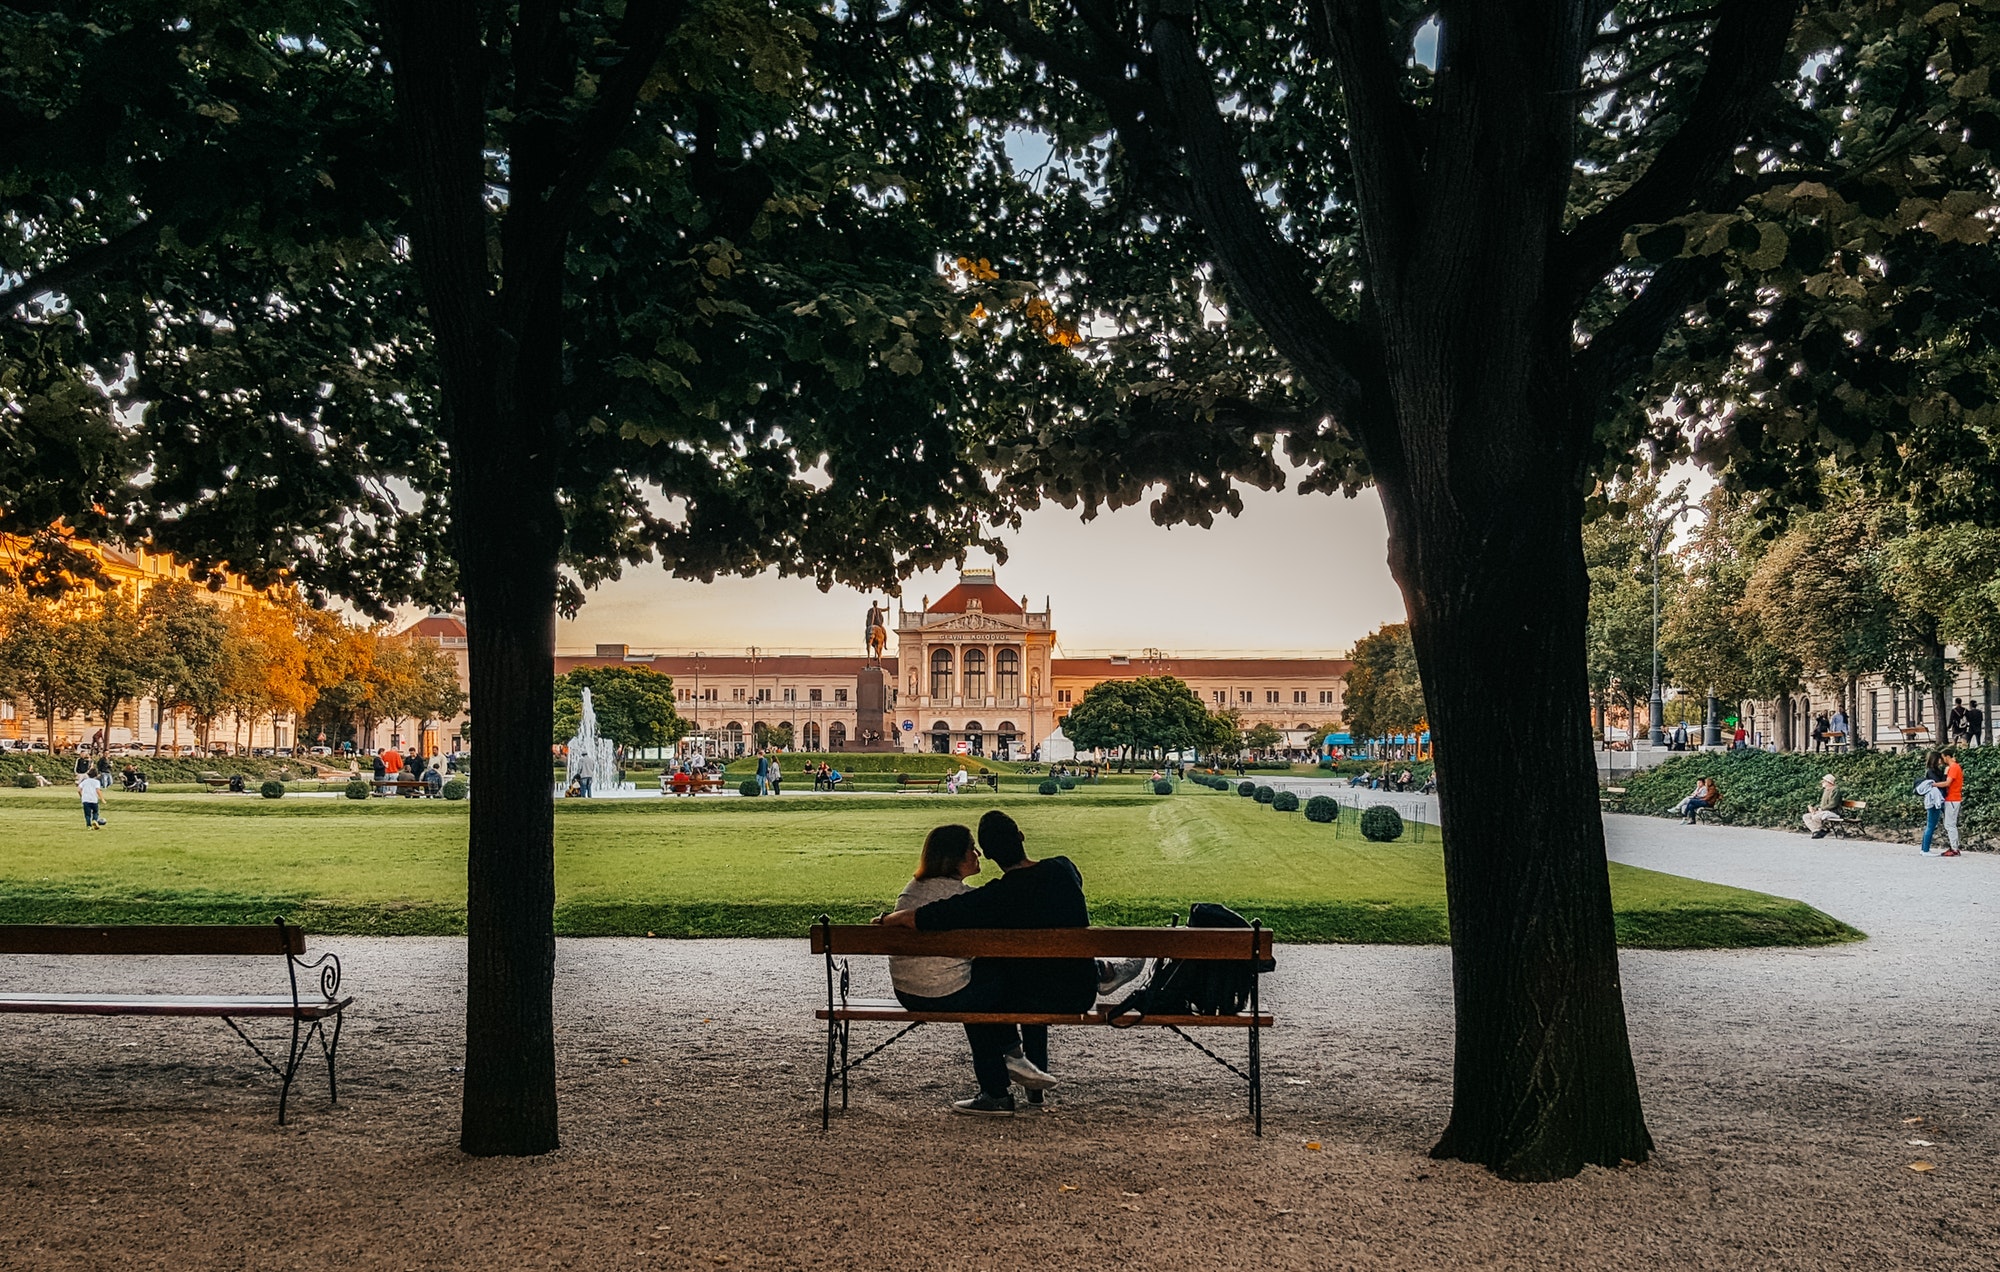 Rear view of a couple sitting on park bench in city of Zagreb in Croatia.